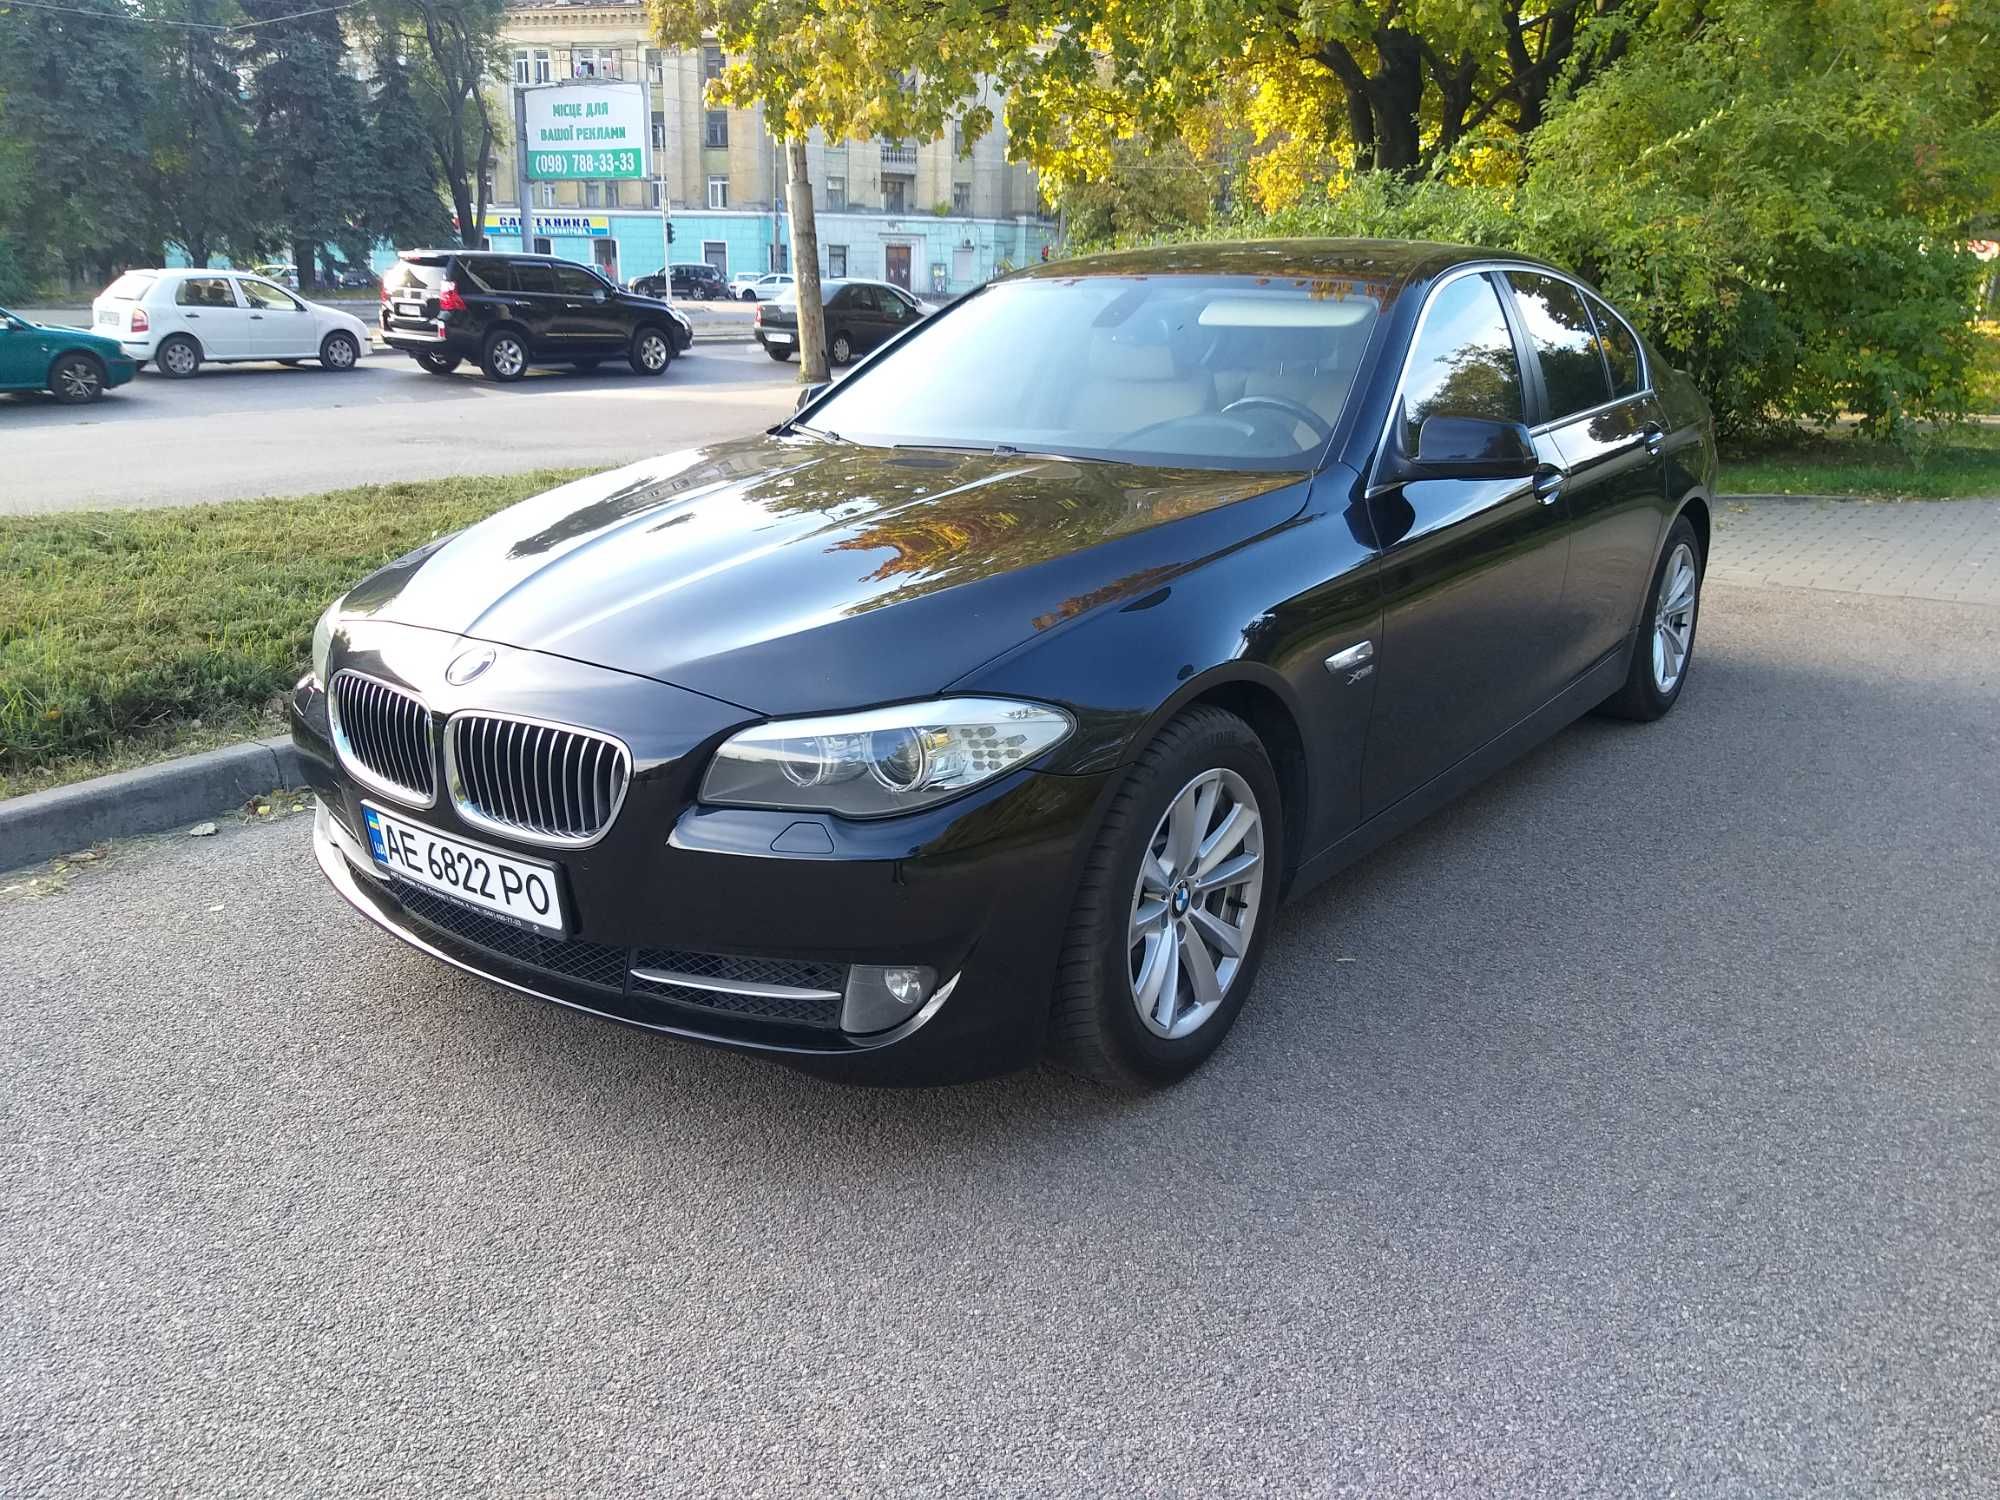 BMW 530d xdrive official